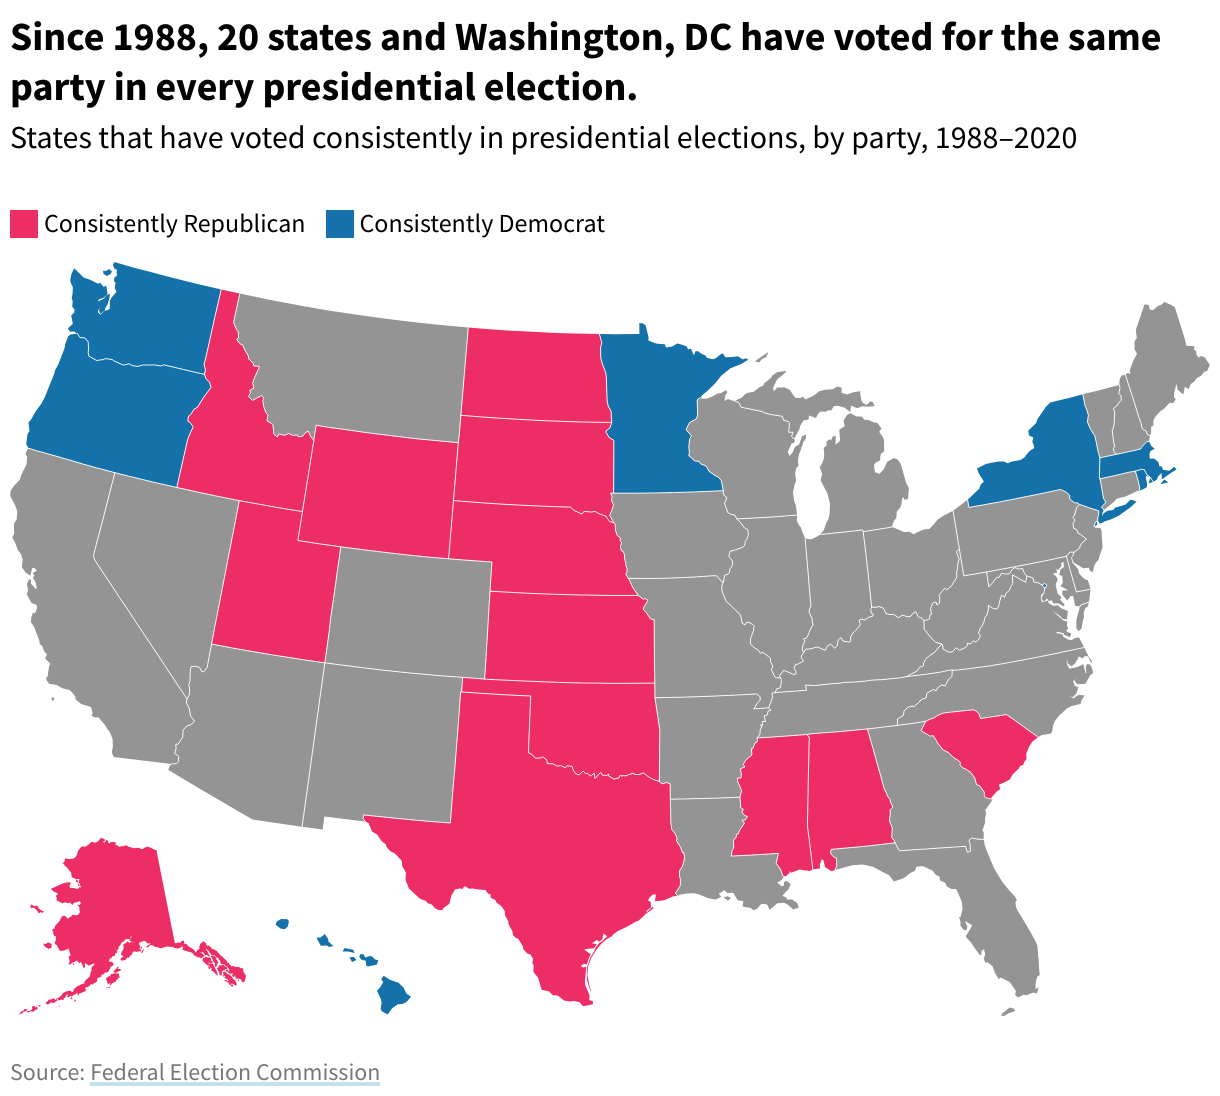 US state map showing the States that have voted consistently in presidential elections by party